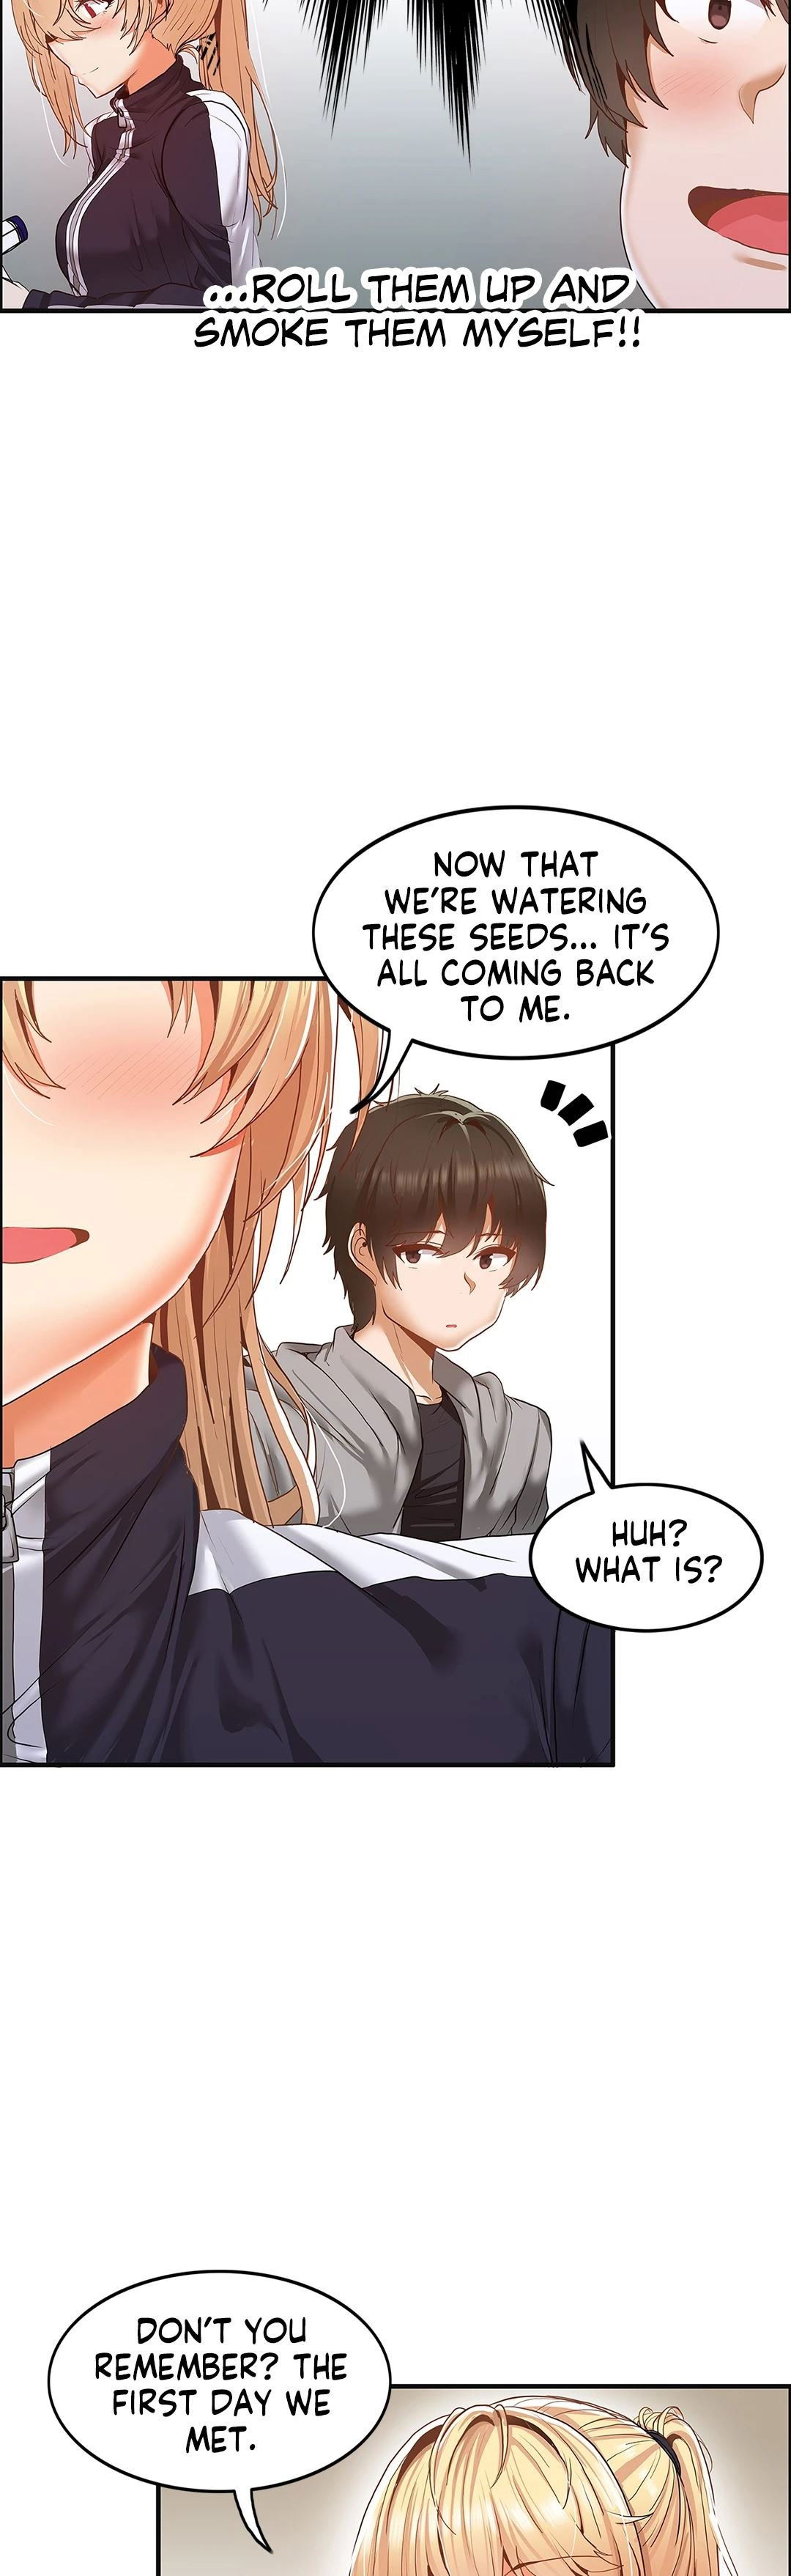 the-two-eves-the-girl-trapped-in-the-wall-chap-3-20